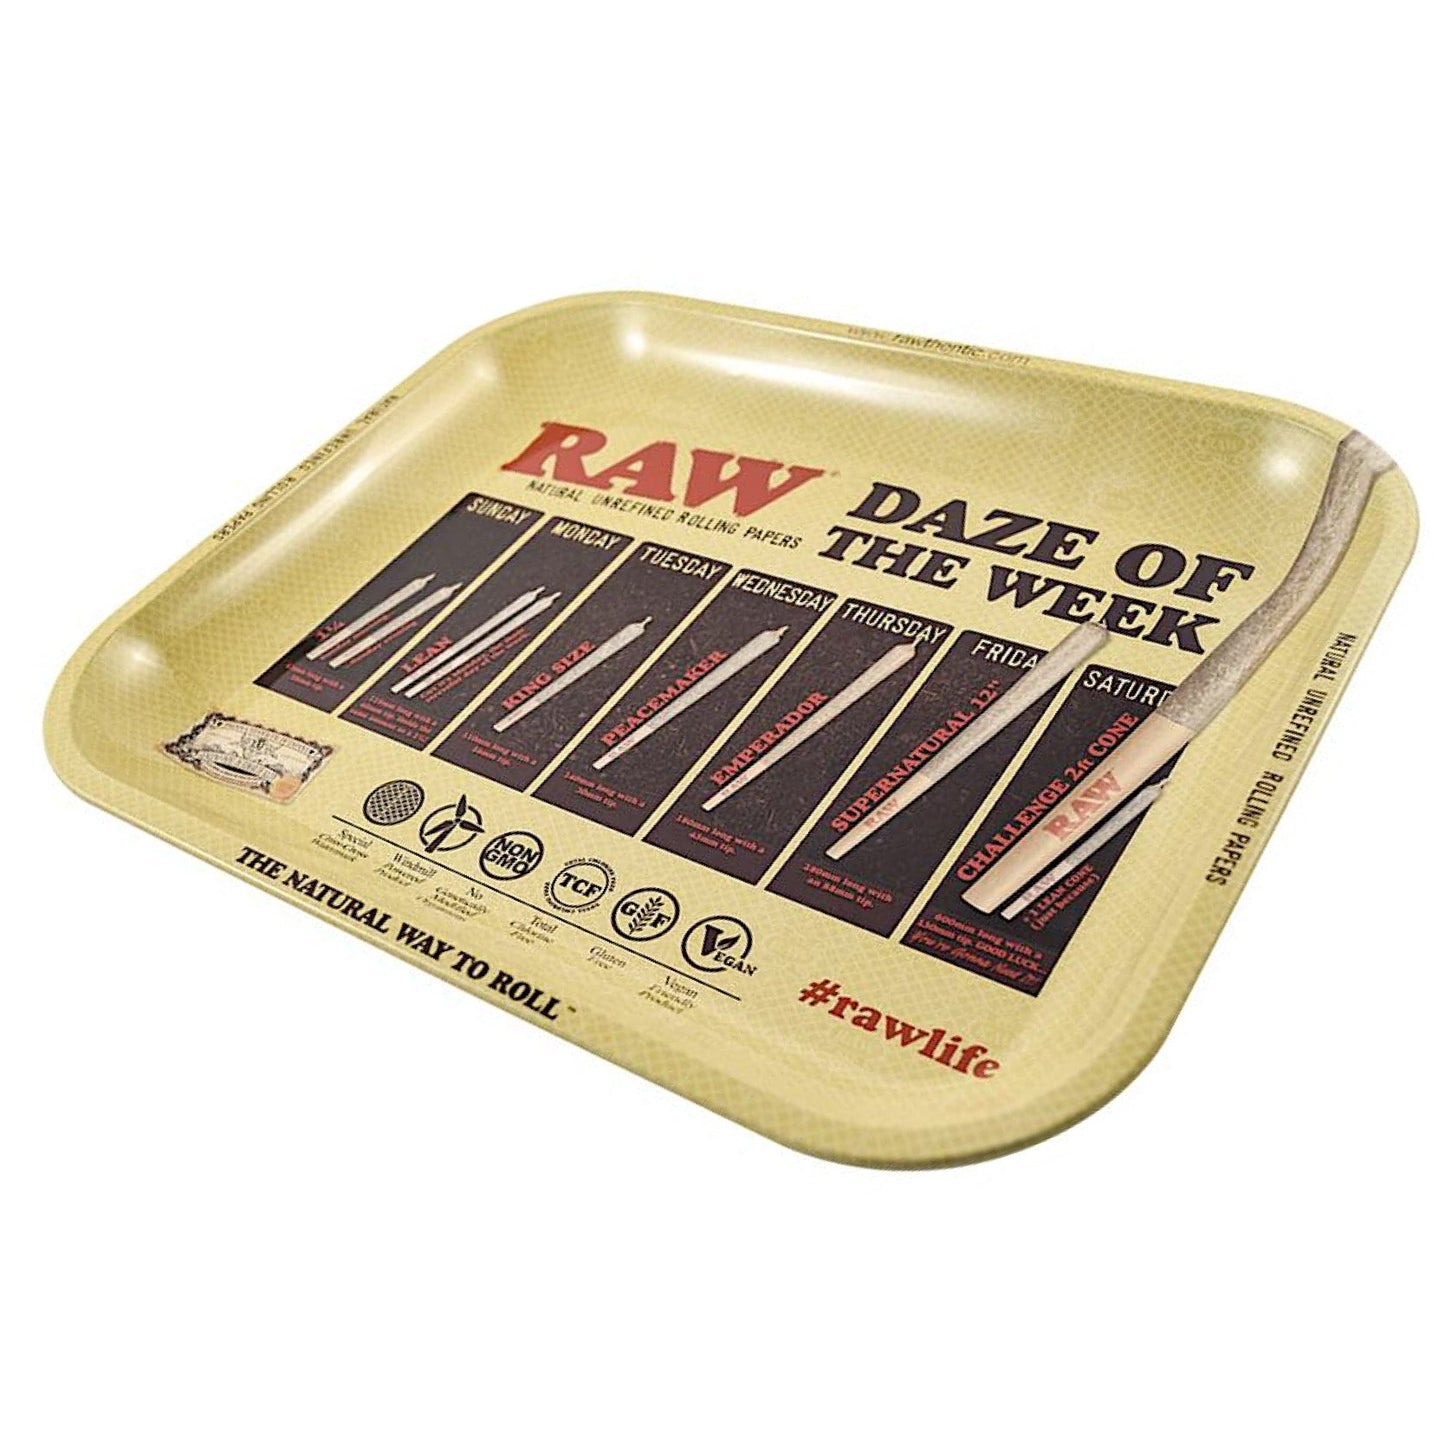 Raw® Daze Of The Week Large Metal Rolling Tray (14 x 11) by RAW Rolling Papers | Mission Dispensary